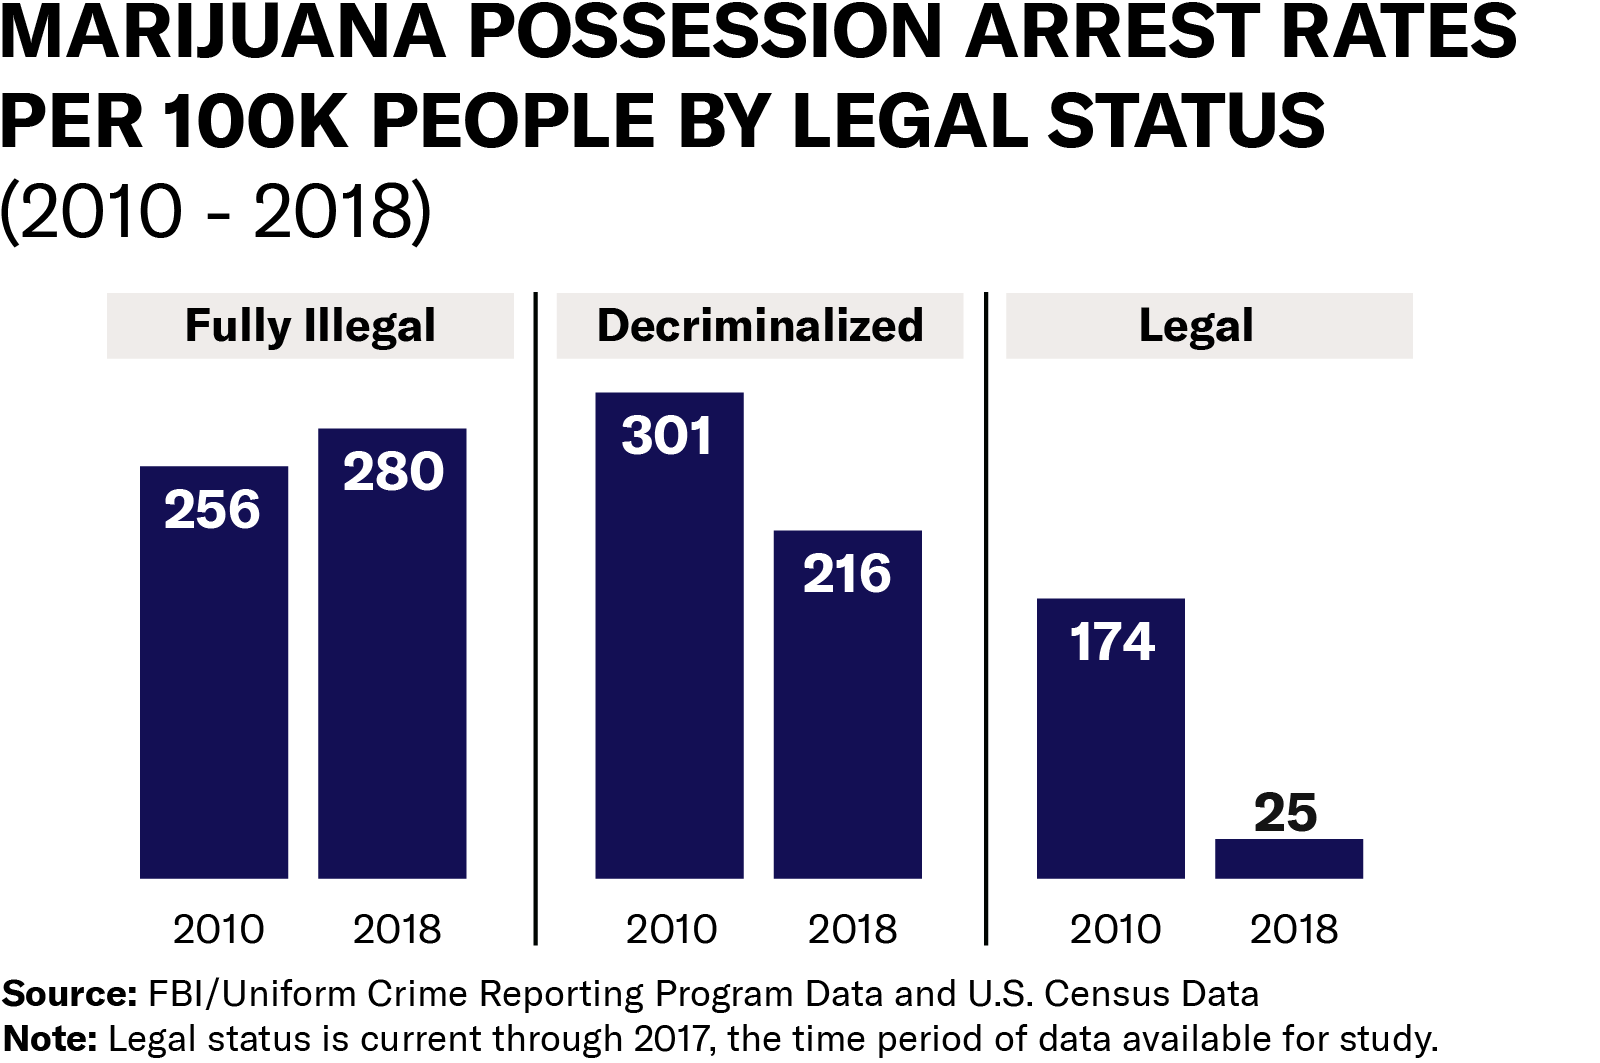 Bar graph showing marijuana possession arrest rates per 100k people by legal status, 2010 to 2018